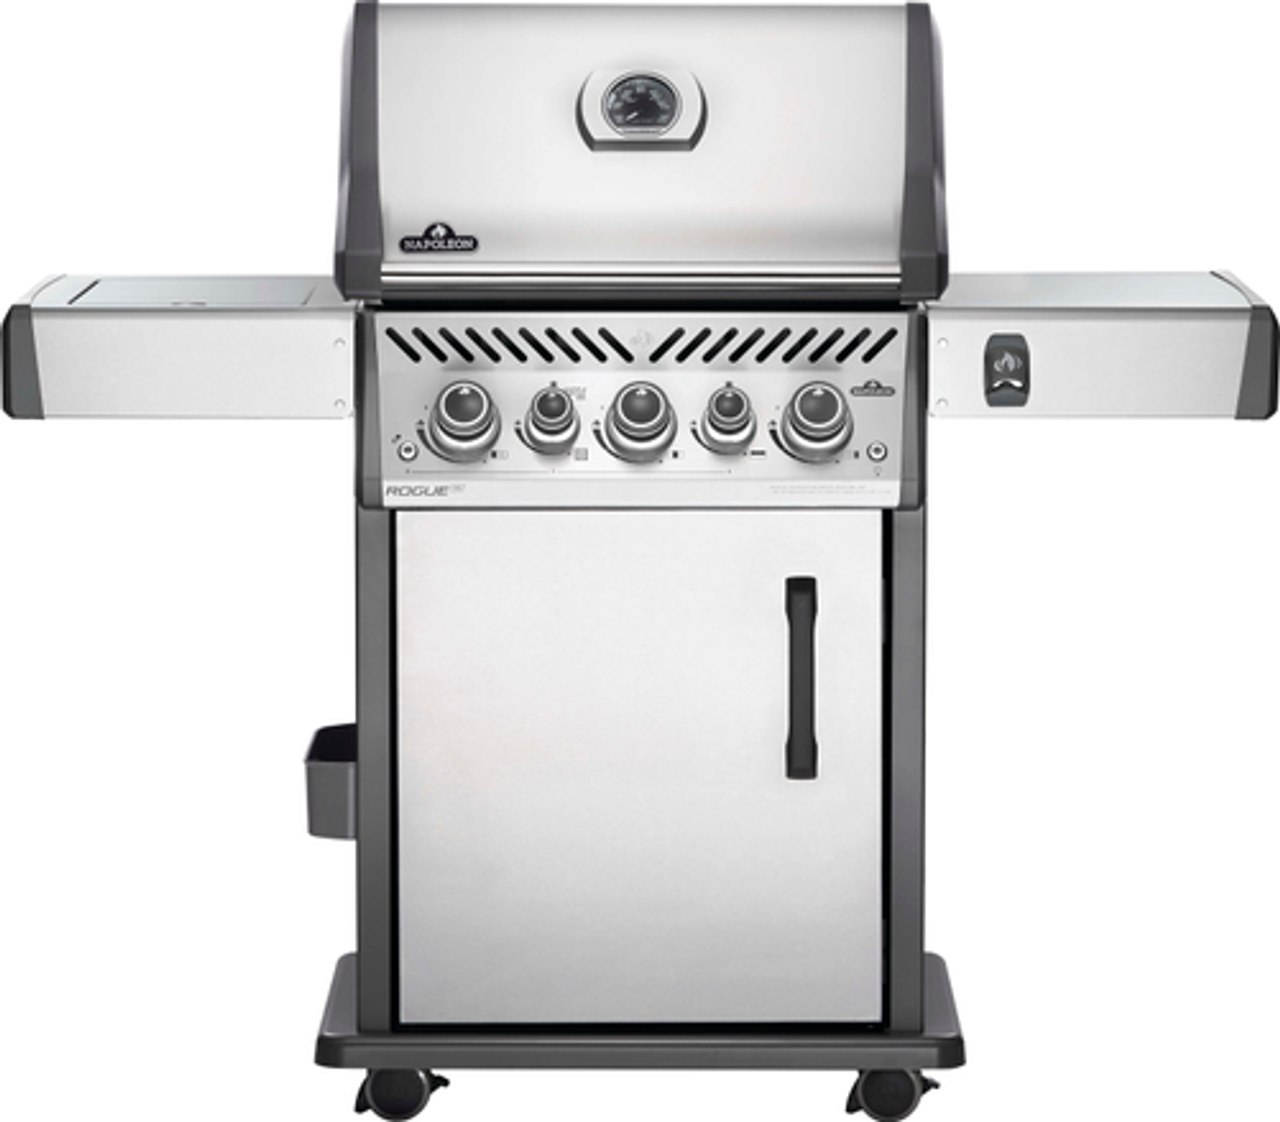 Napoleon - Rogue SE 425 Propane Gas Grill with Infrared Rear and Side Burners, Stainless Steel - Stainless Steel